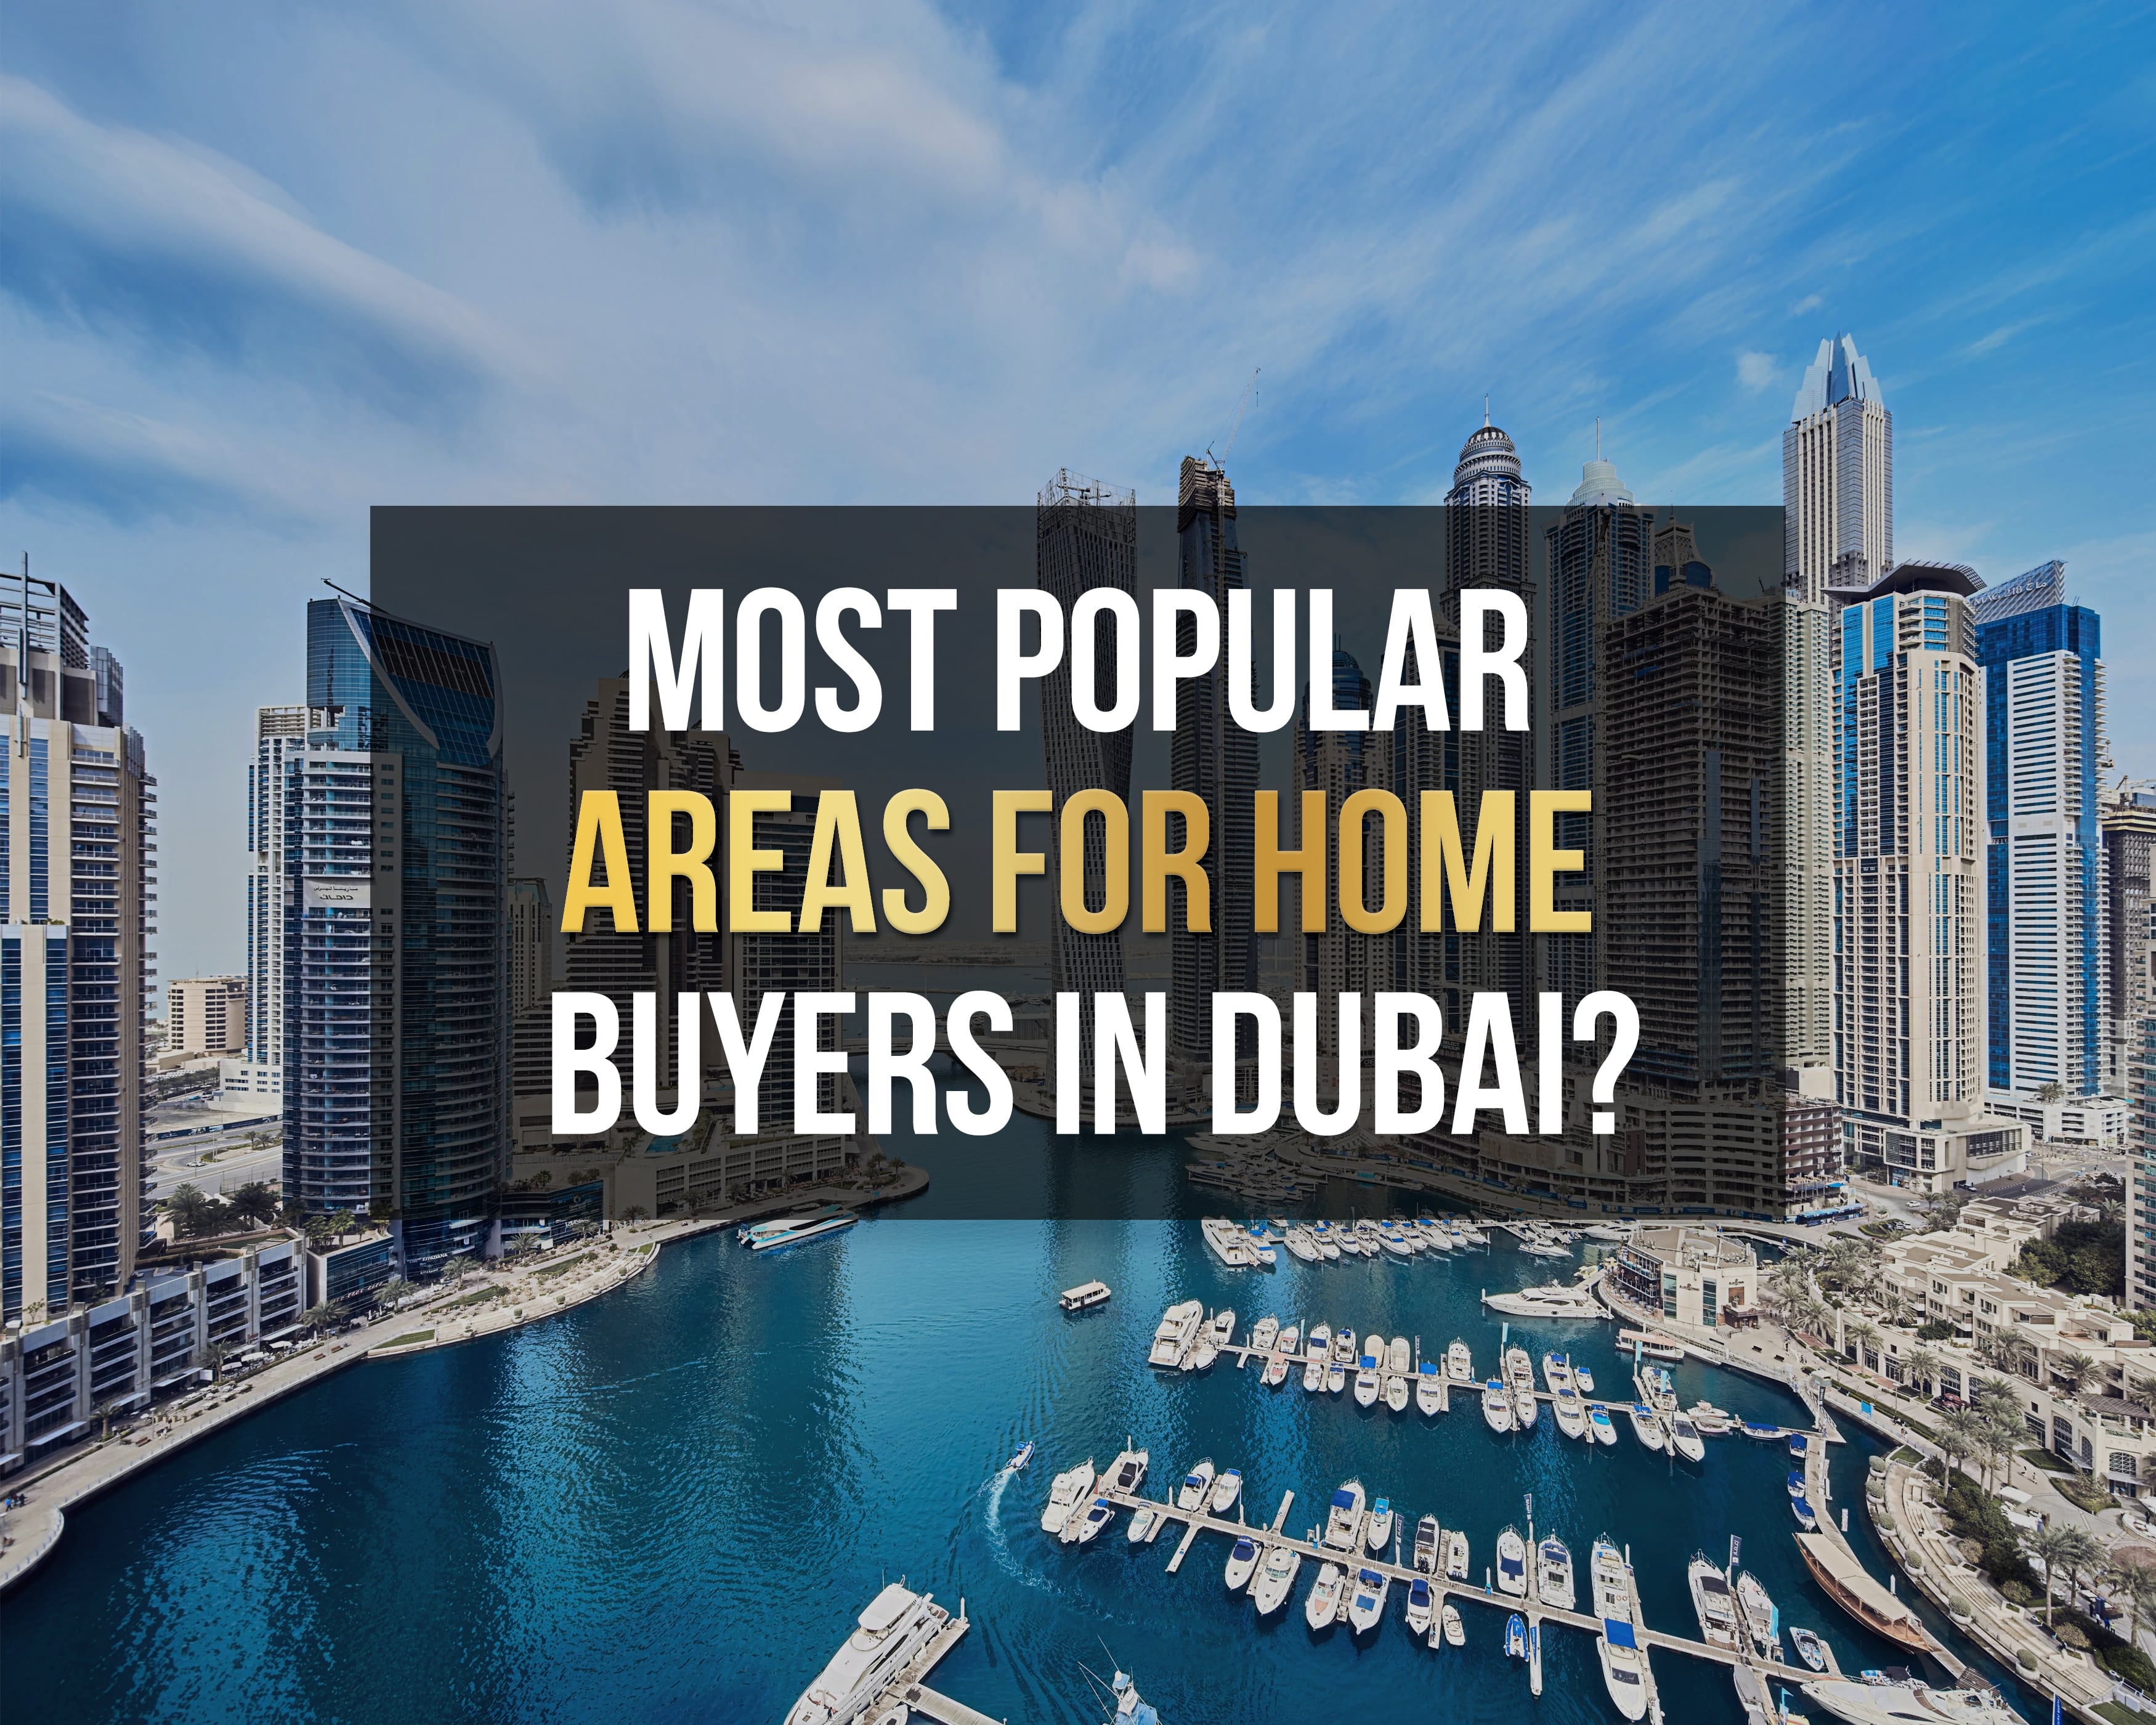 Most popular areas for home buyers in Dubai?